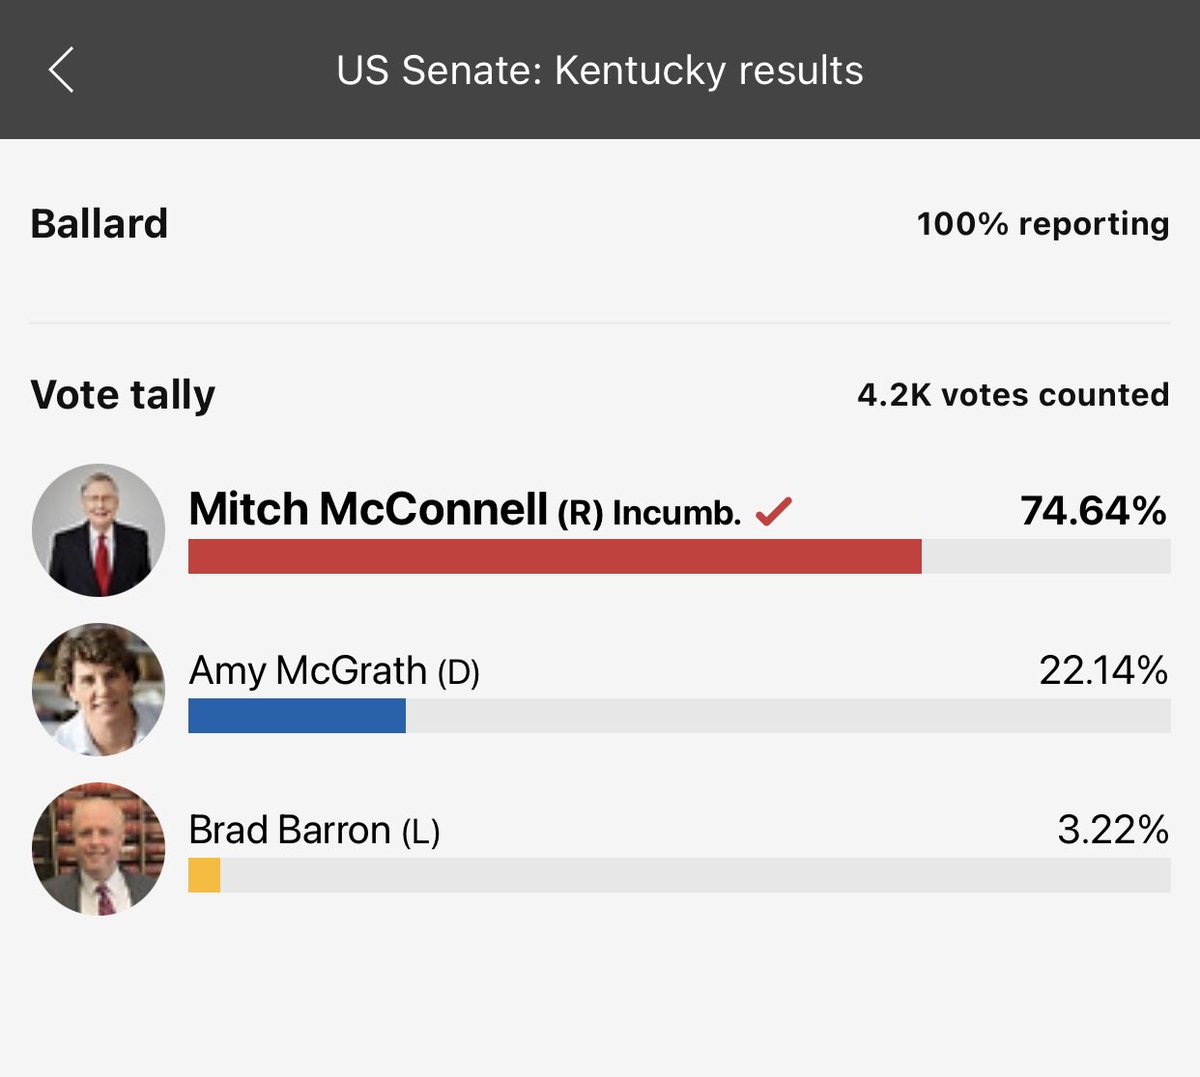 BALLARD - He won 74.64% of 4,200 votes - roughly 3,135 votes. There are 2,285 registered Republicans & 3,966 Democrats & 358 Other